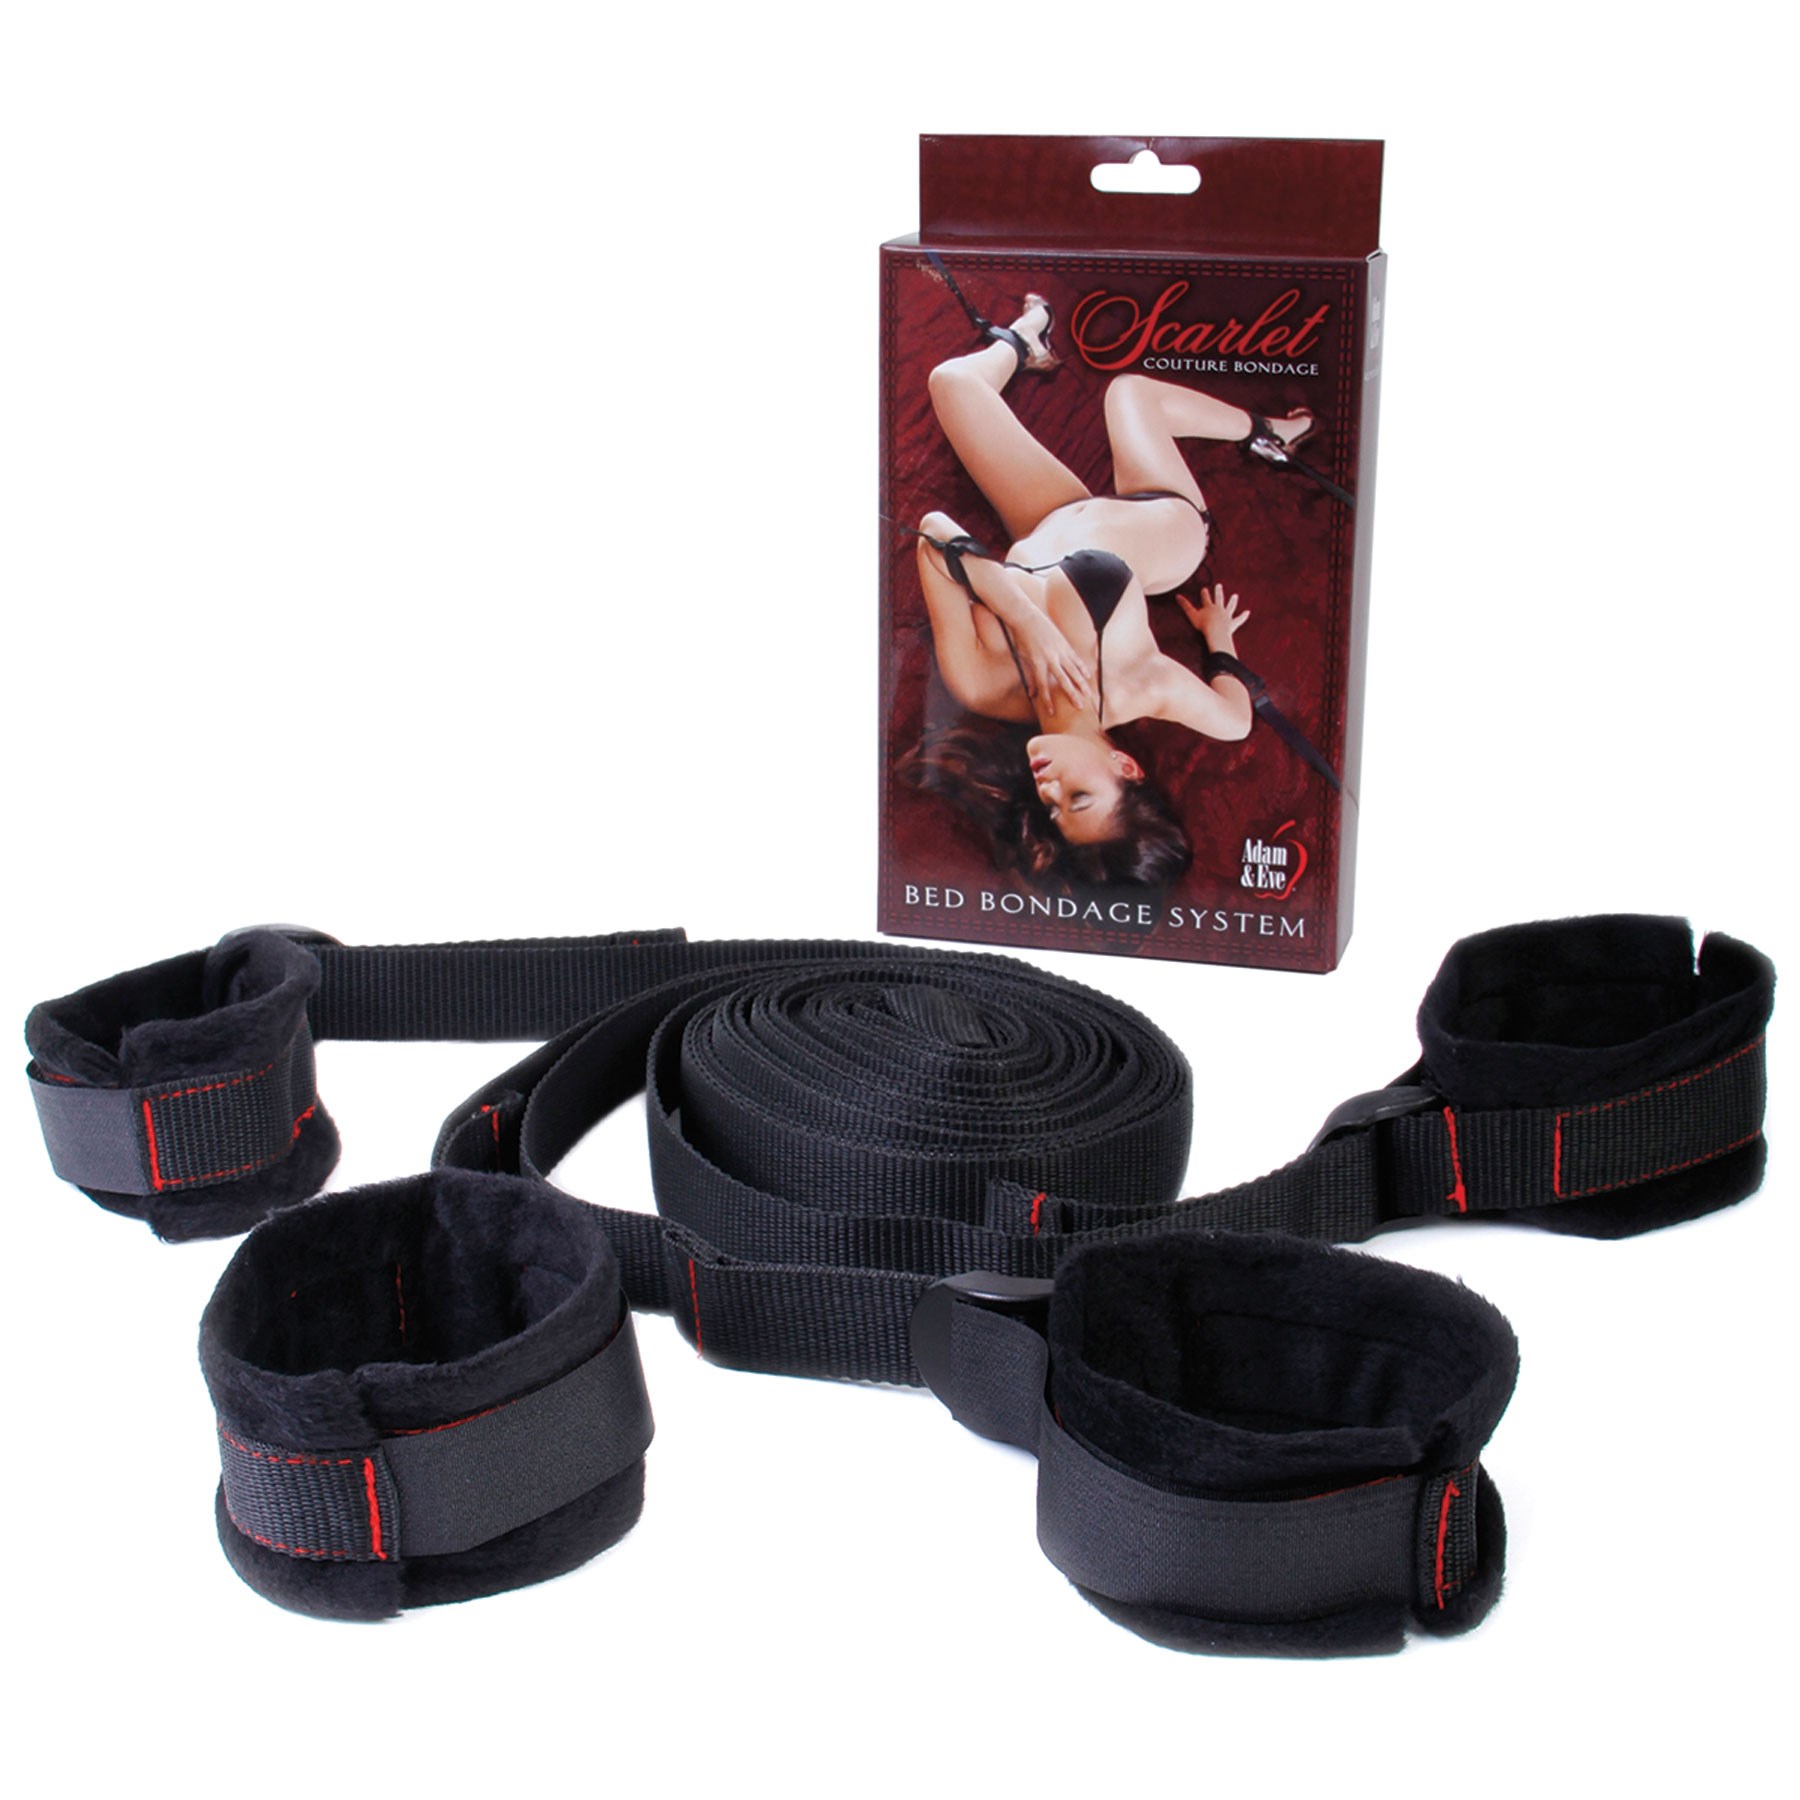 Scarlet Bed Bondage System - Product and Packaging Shot